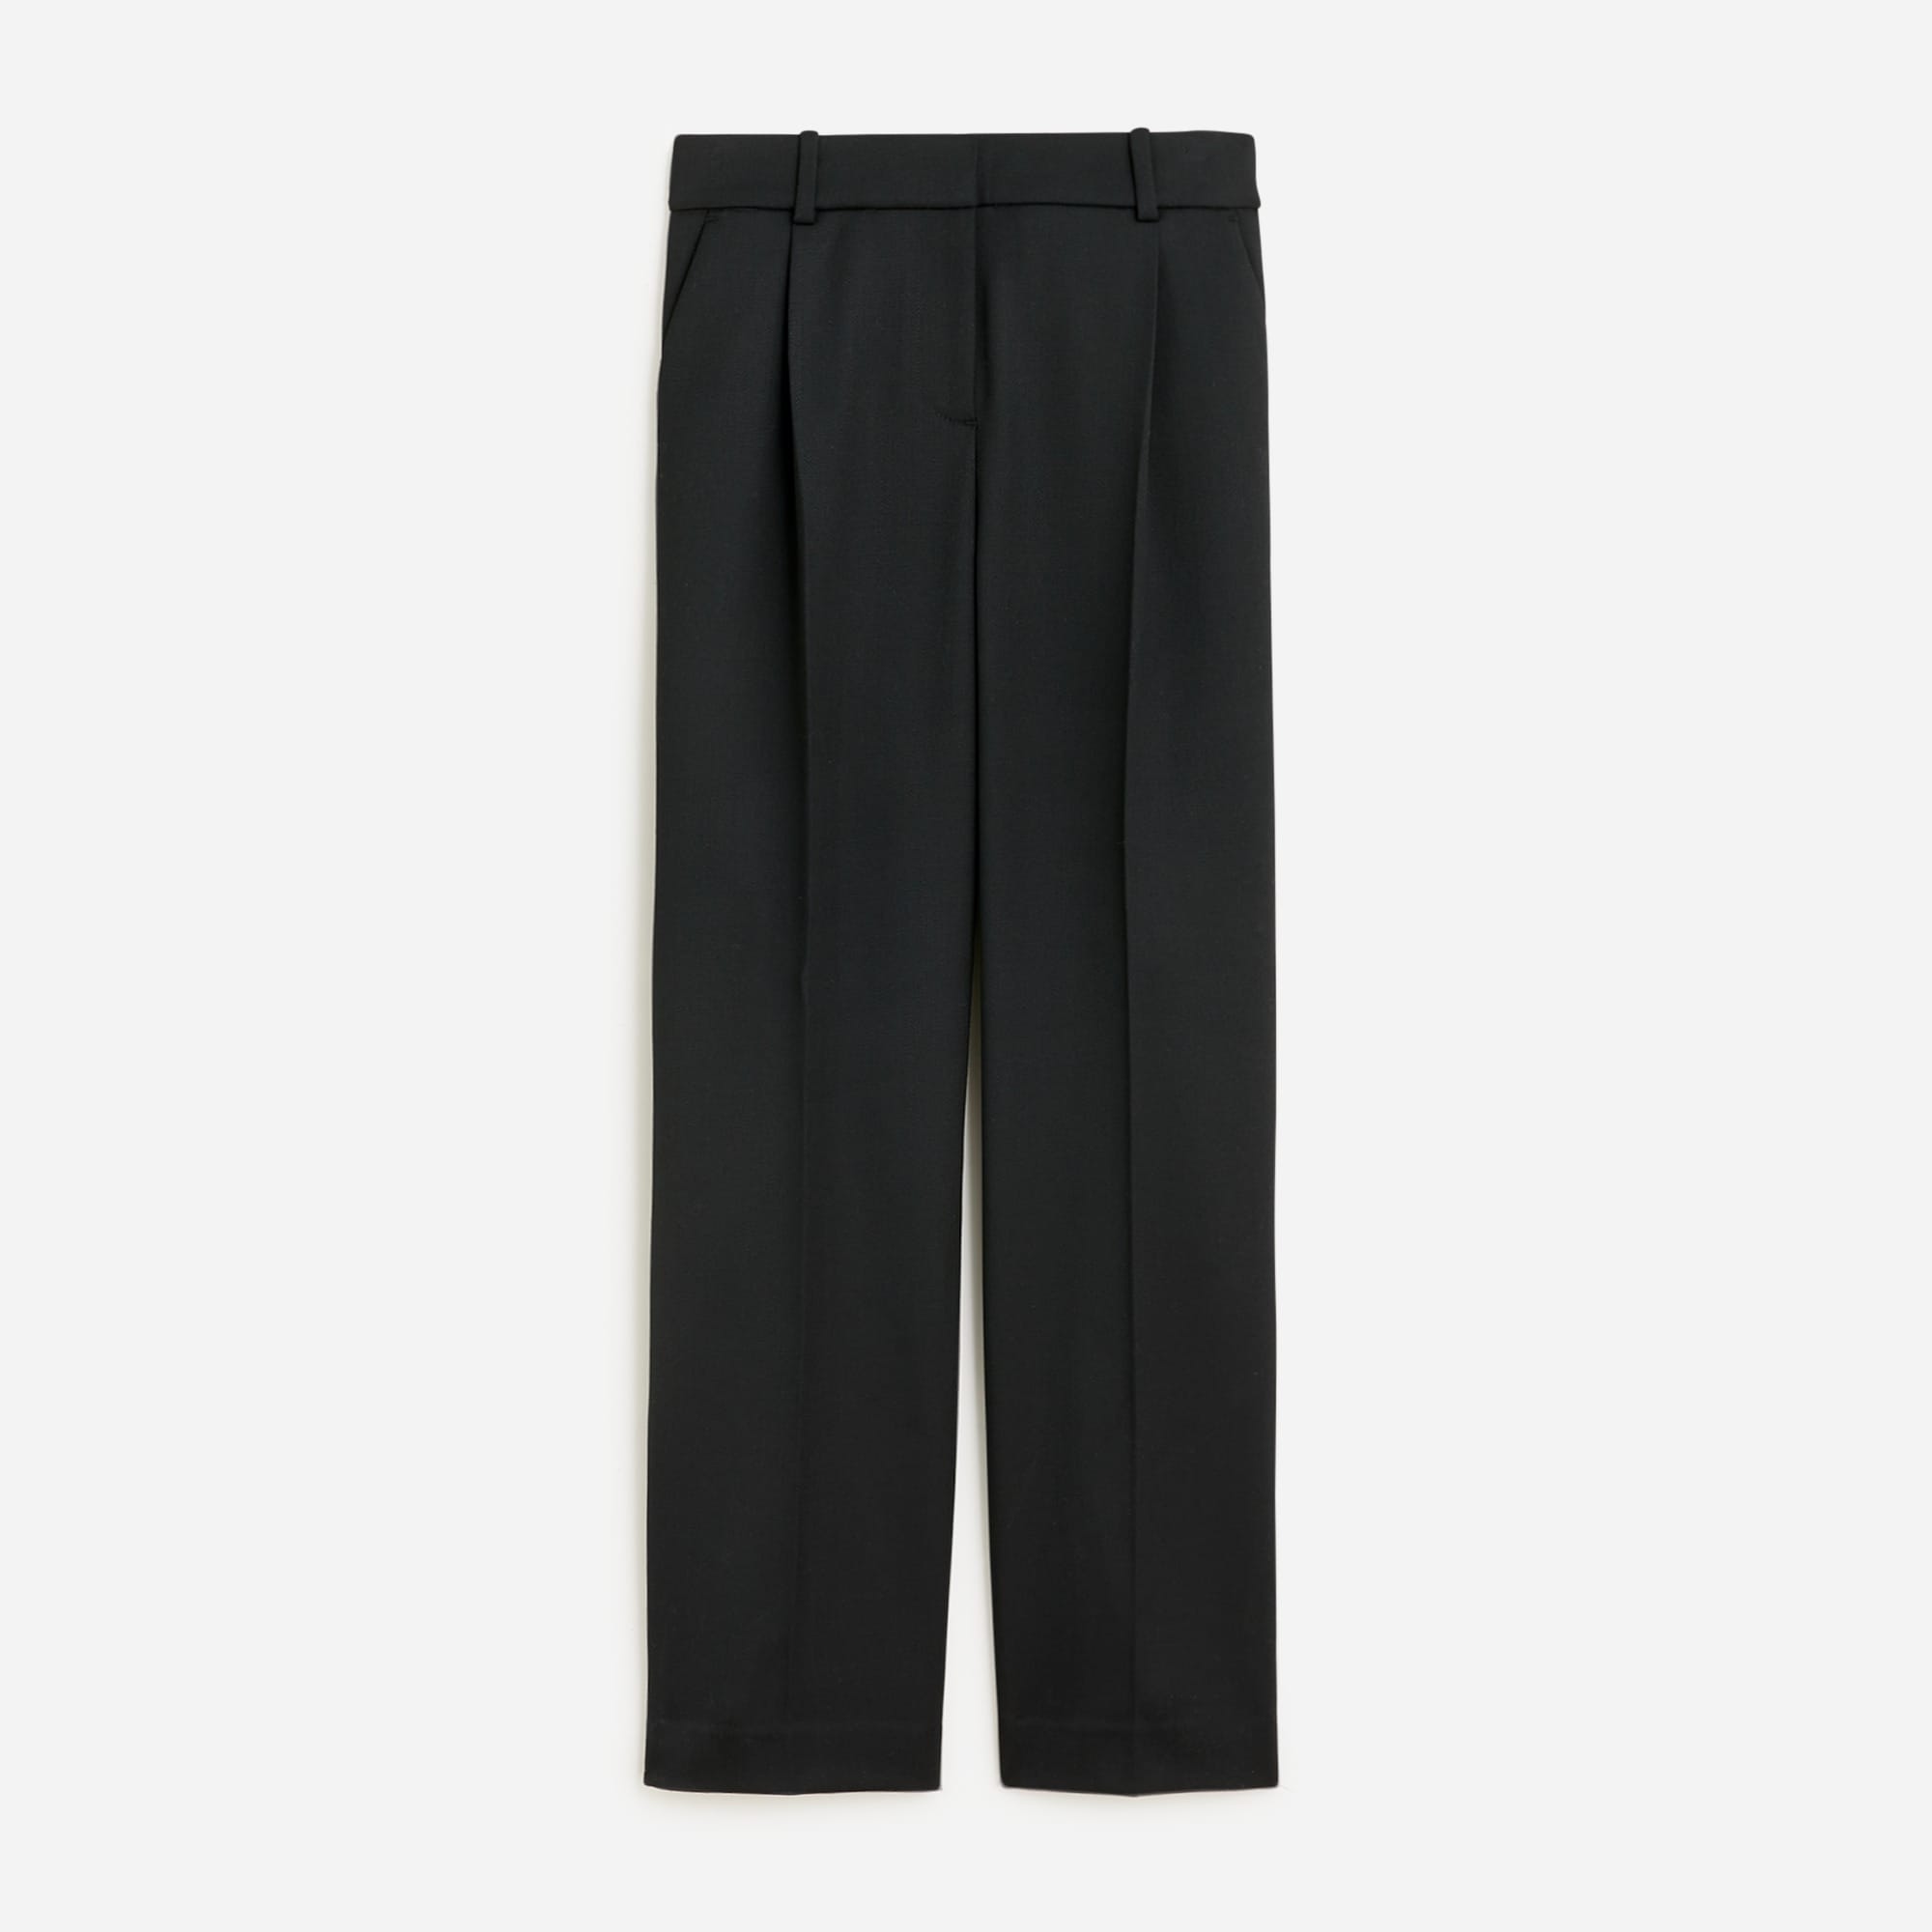  Tall straight-leg essential pant in wool blend